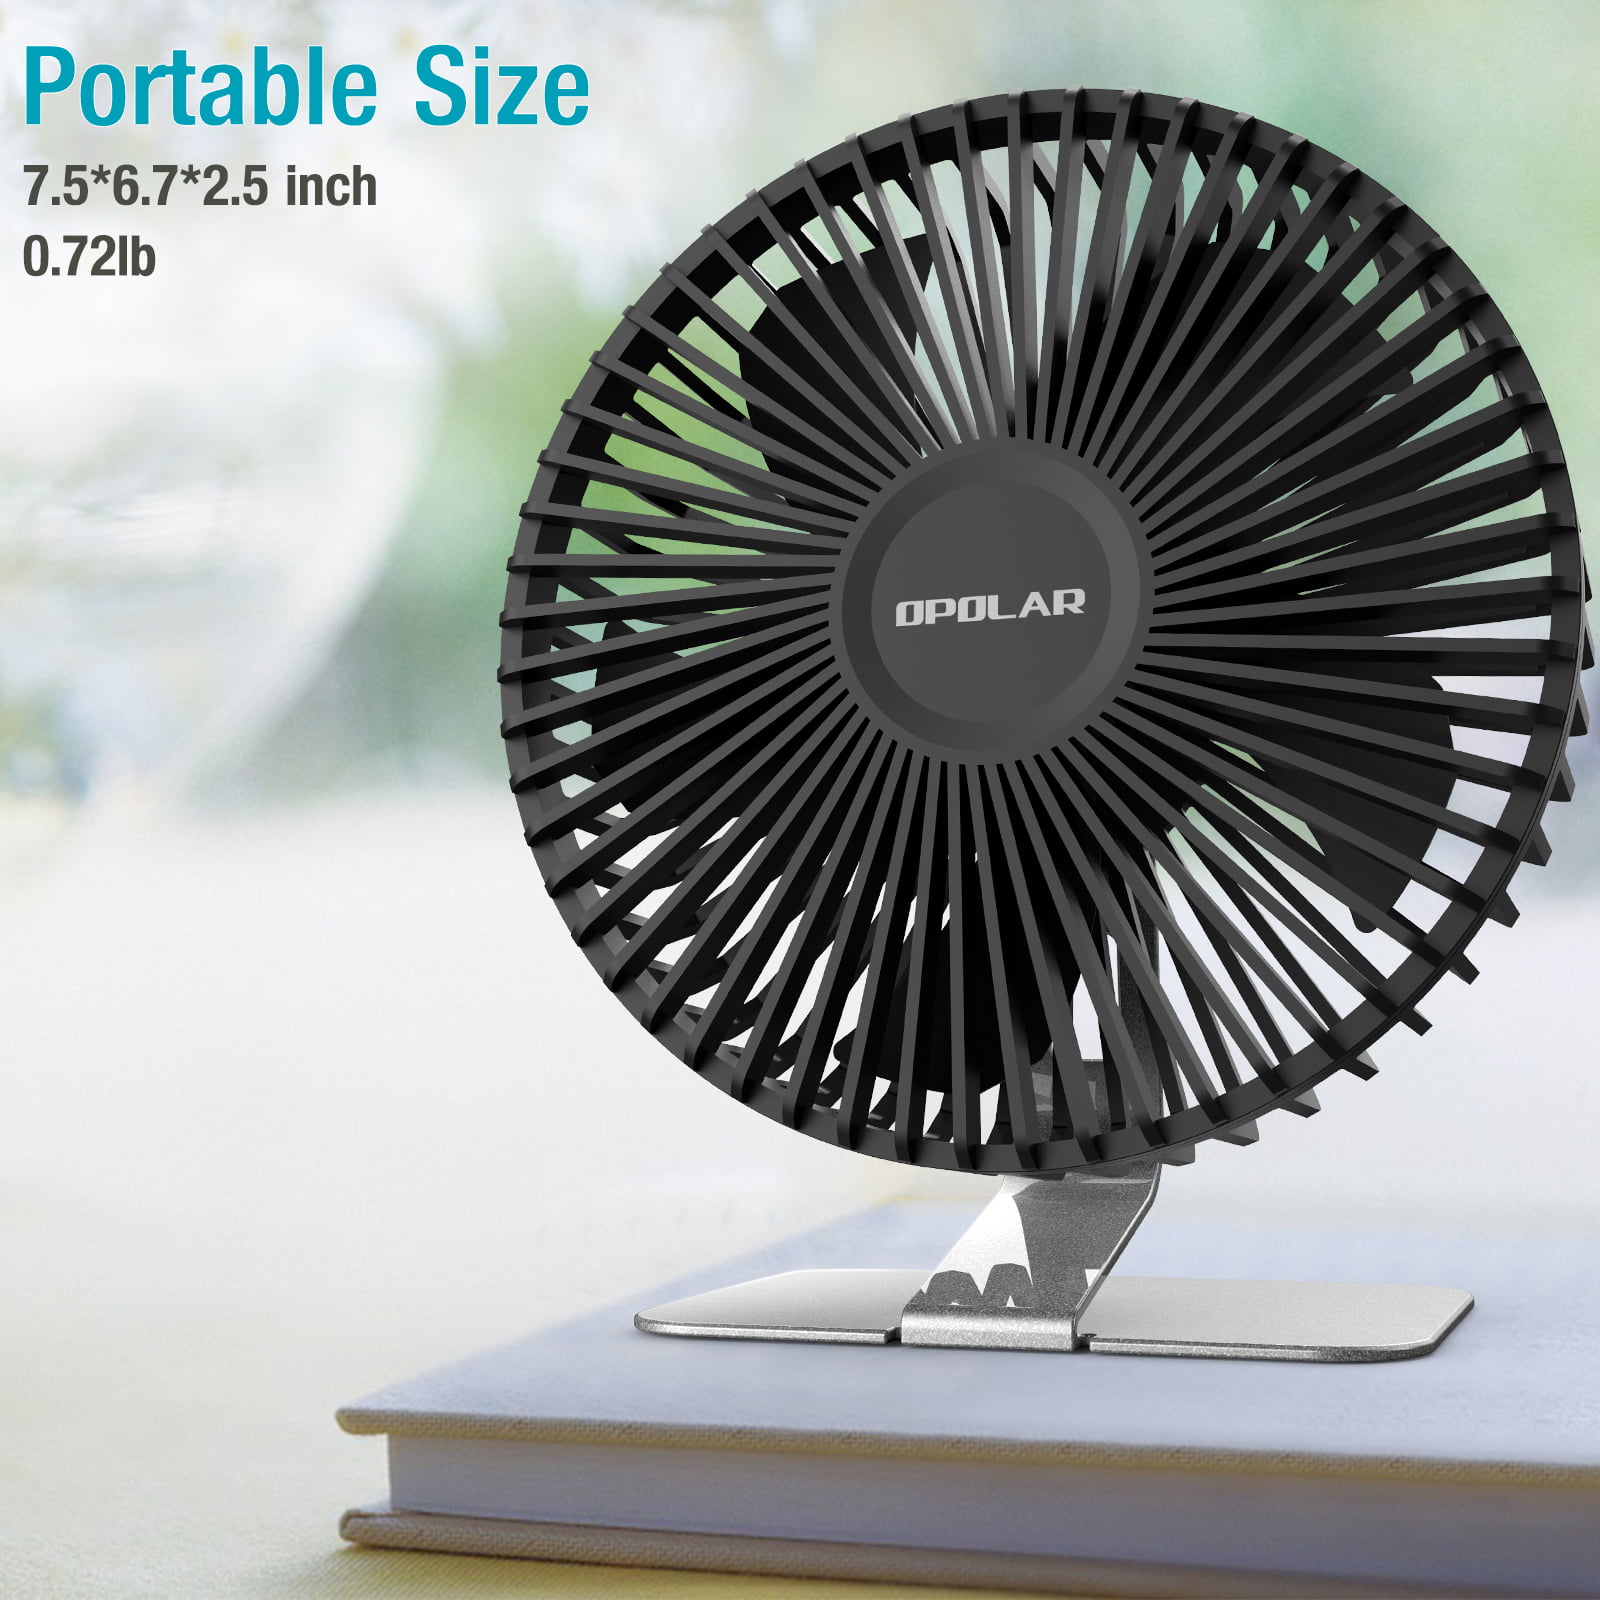 No Battery Personal Table Fan with Strong Airflow Quiet Operation 9 Inch USB Desk Fan USB Powered ONLY Portable Cooling Fan for Home Office Bedroom-Black 